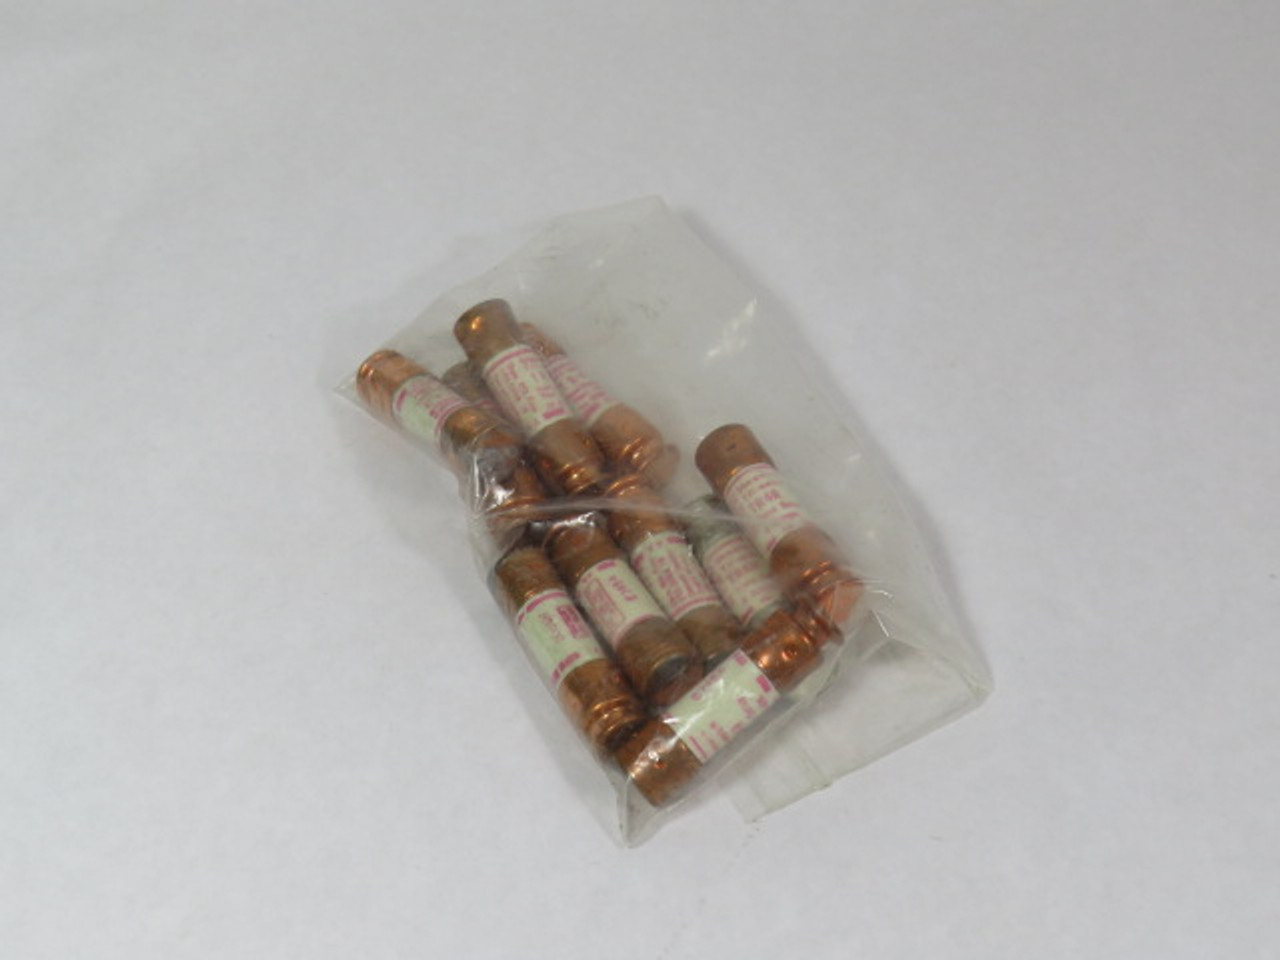 Shawmut TR4R Time Delay Fuse 4A 250V Lot of 10 USED